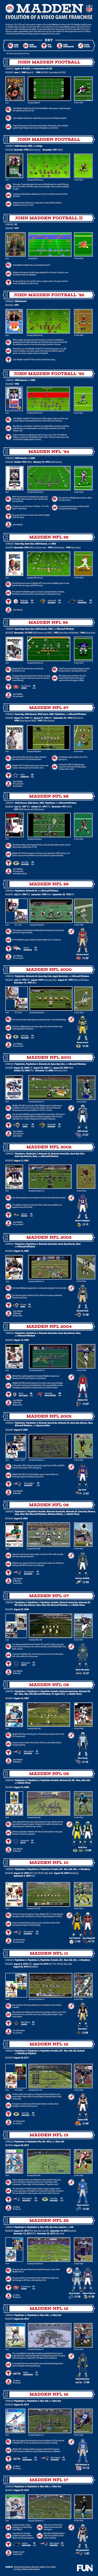 Madden NFL Evolution of a Football Video Game Franchise Infographic